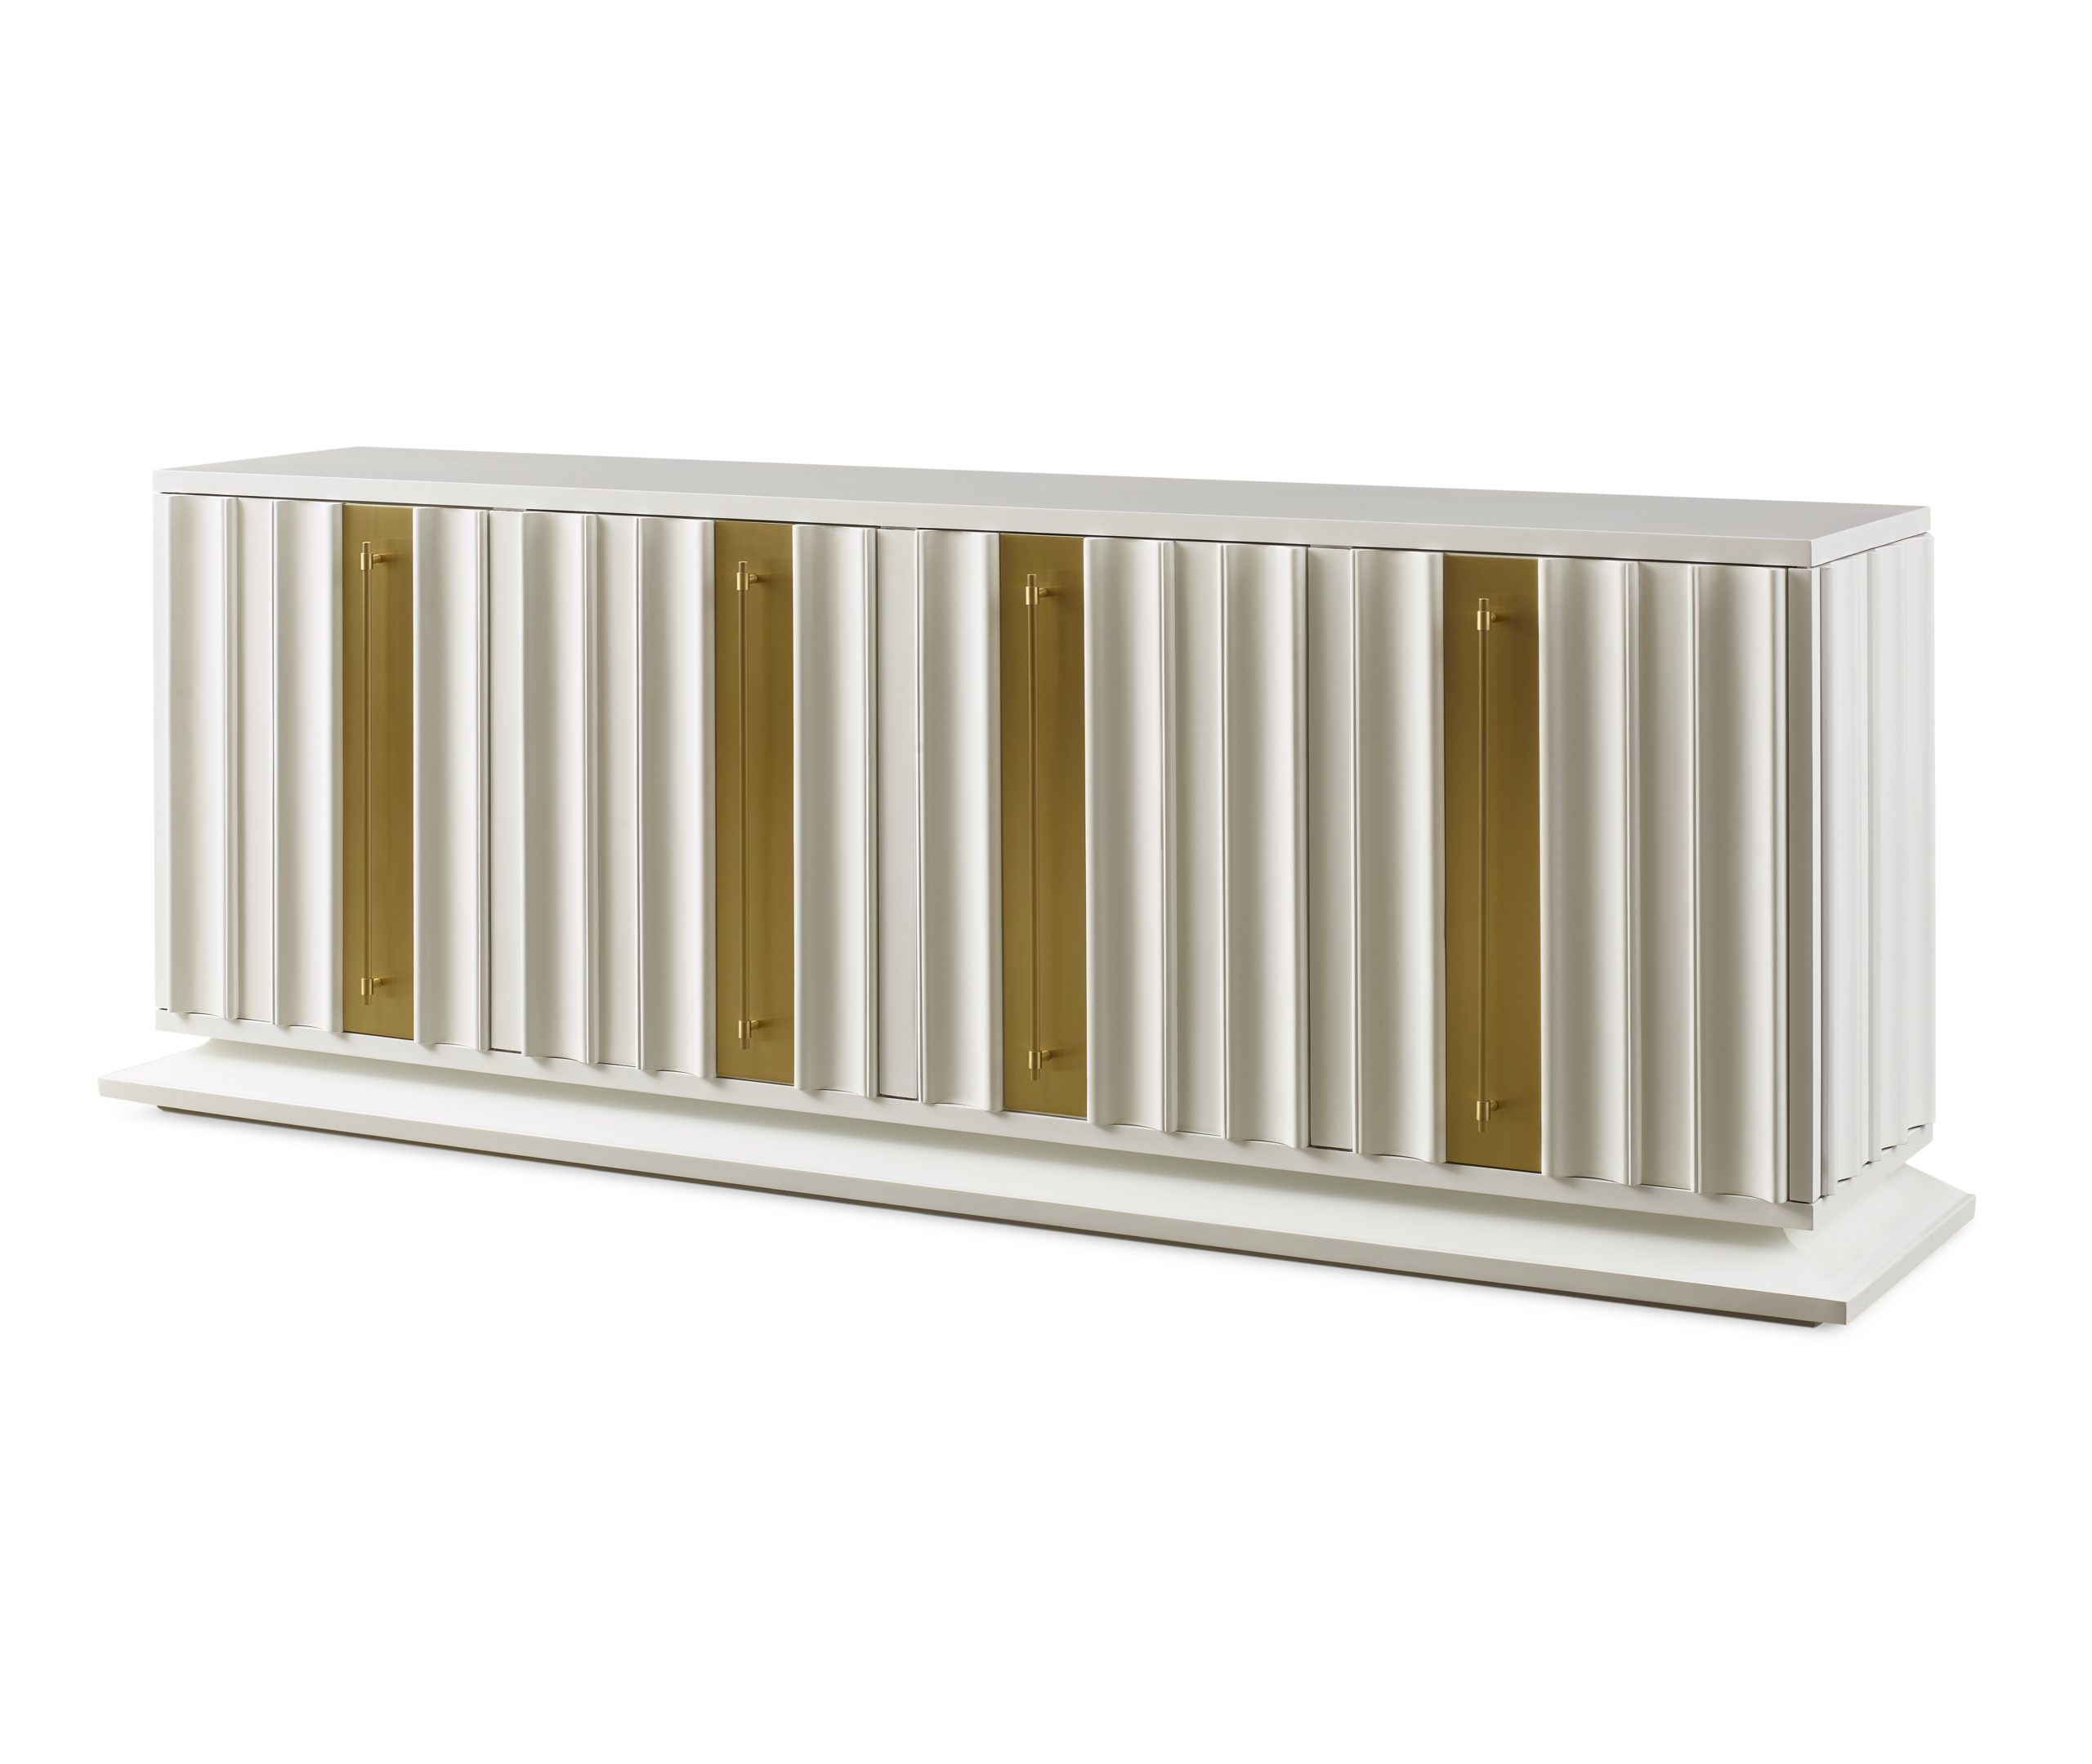 Baker_products_WNWN_cascade_credenza_BAA3283_FRONT_3QRT-scaled-1